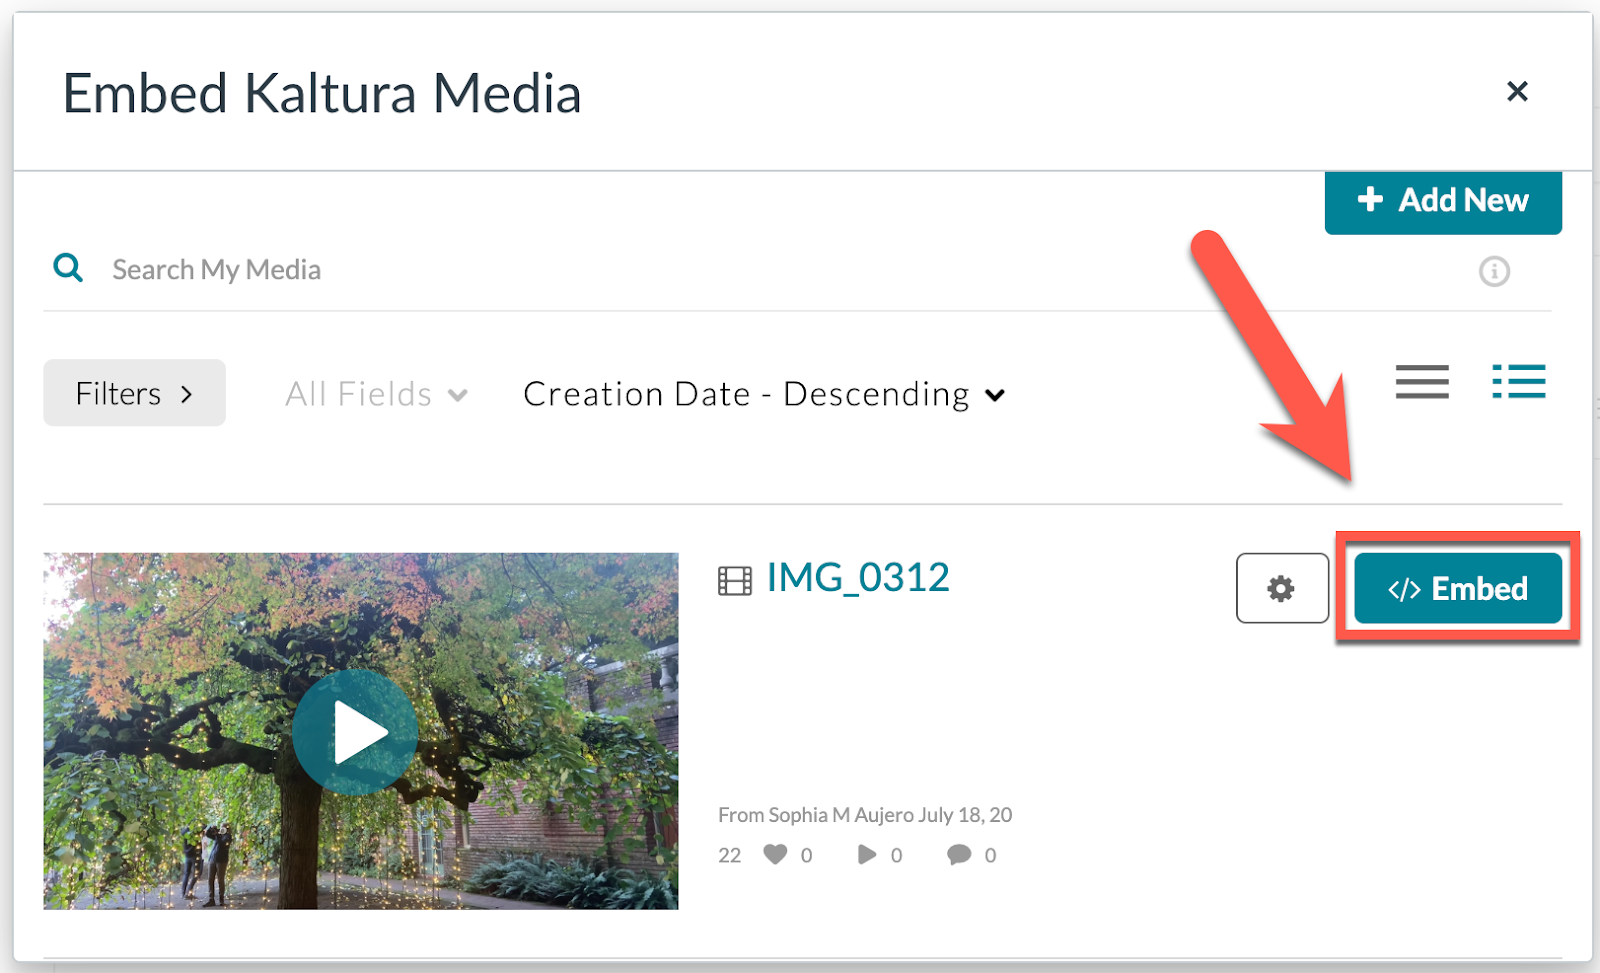 Embed kaltura media window with arrow pointing to the embed button